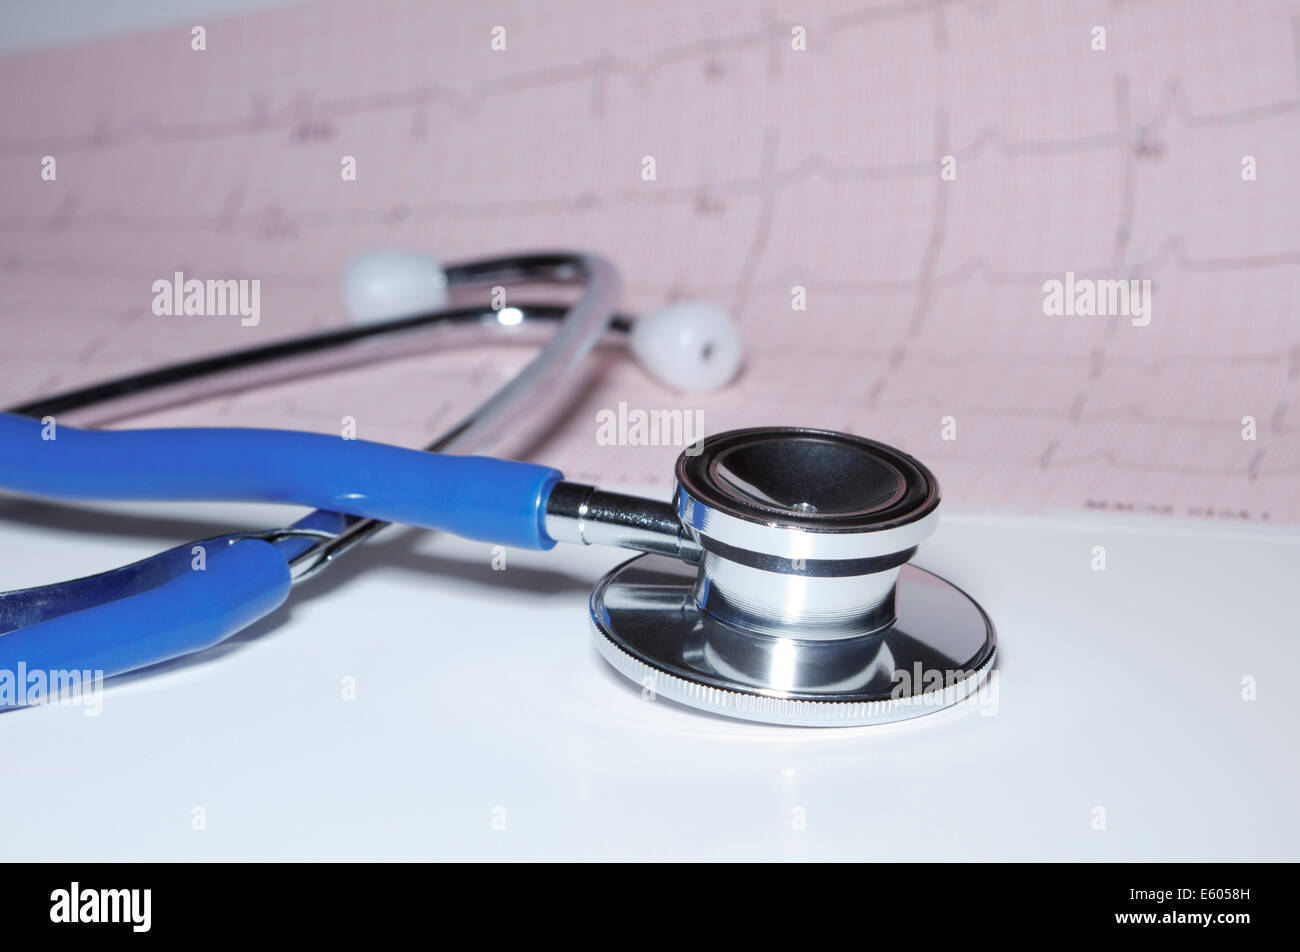 Electrocardiogram Acoustic stethoscope and electrocardiogram printout. Stock Photo